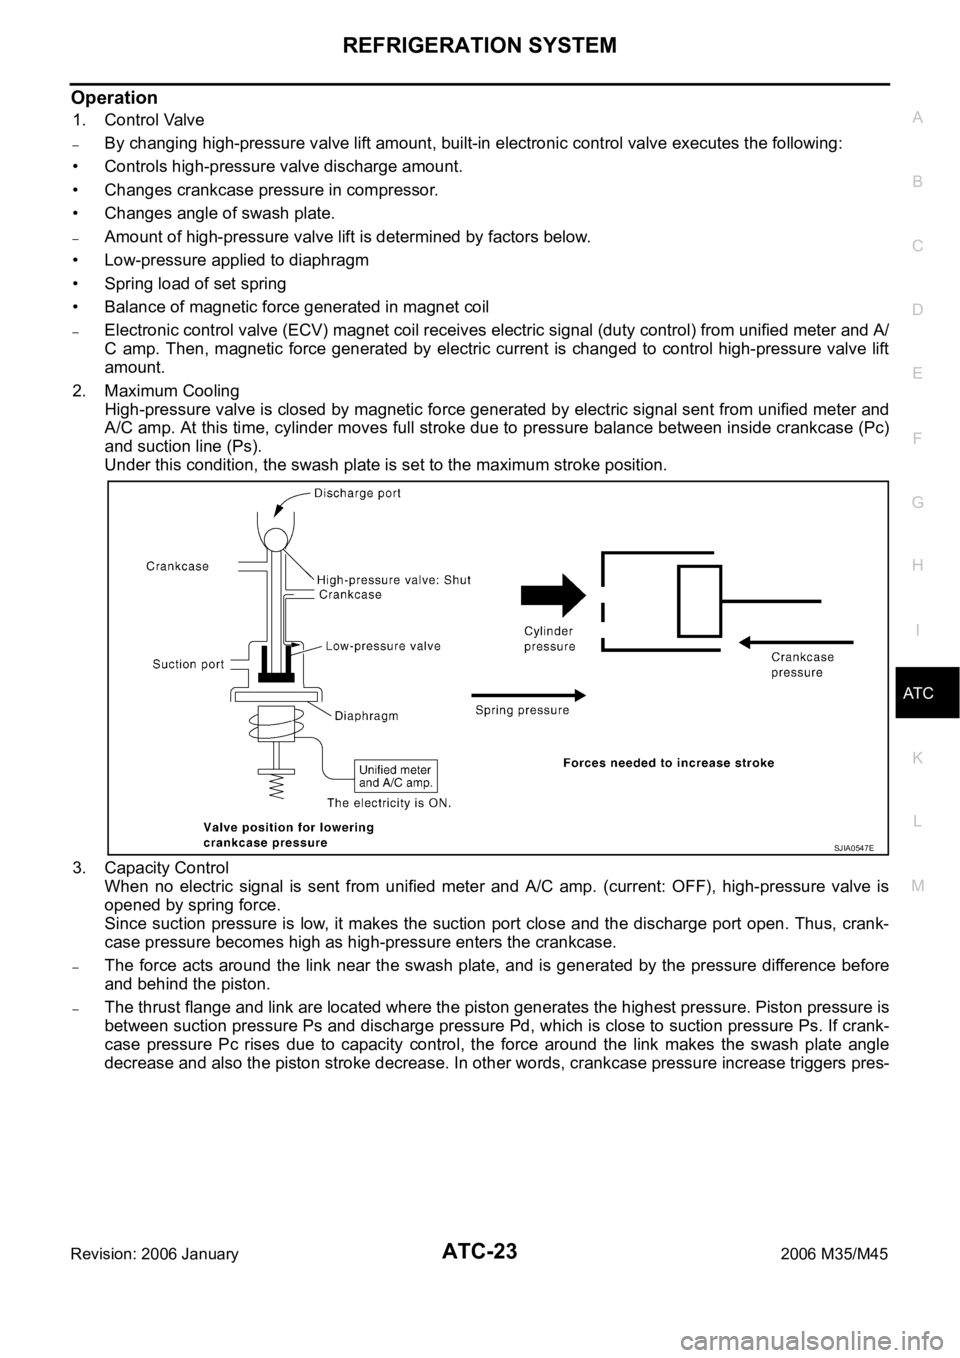 INFINITI M35 2006  Factory Service Manual REFRIGERATION SYSTEM
ATC-23
C
D
E
F
G
H
I
K
L
MA
B
AT C
Revision: 2006 January2006 M35/M45
Operation
1. Control Valve
–By changing high-pressure valve lift amount, built-in electronic control valve 